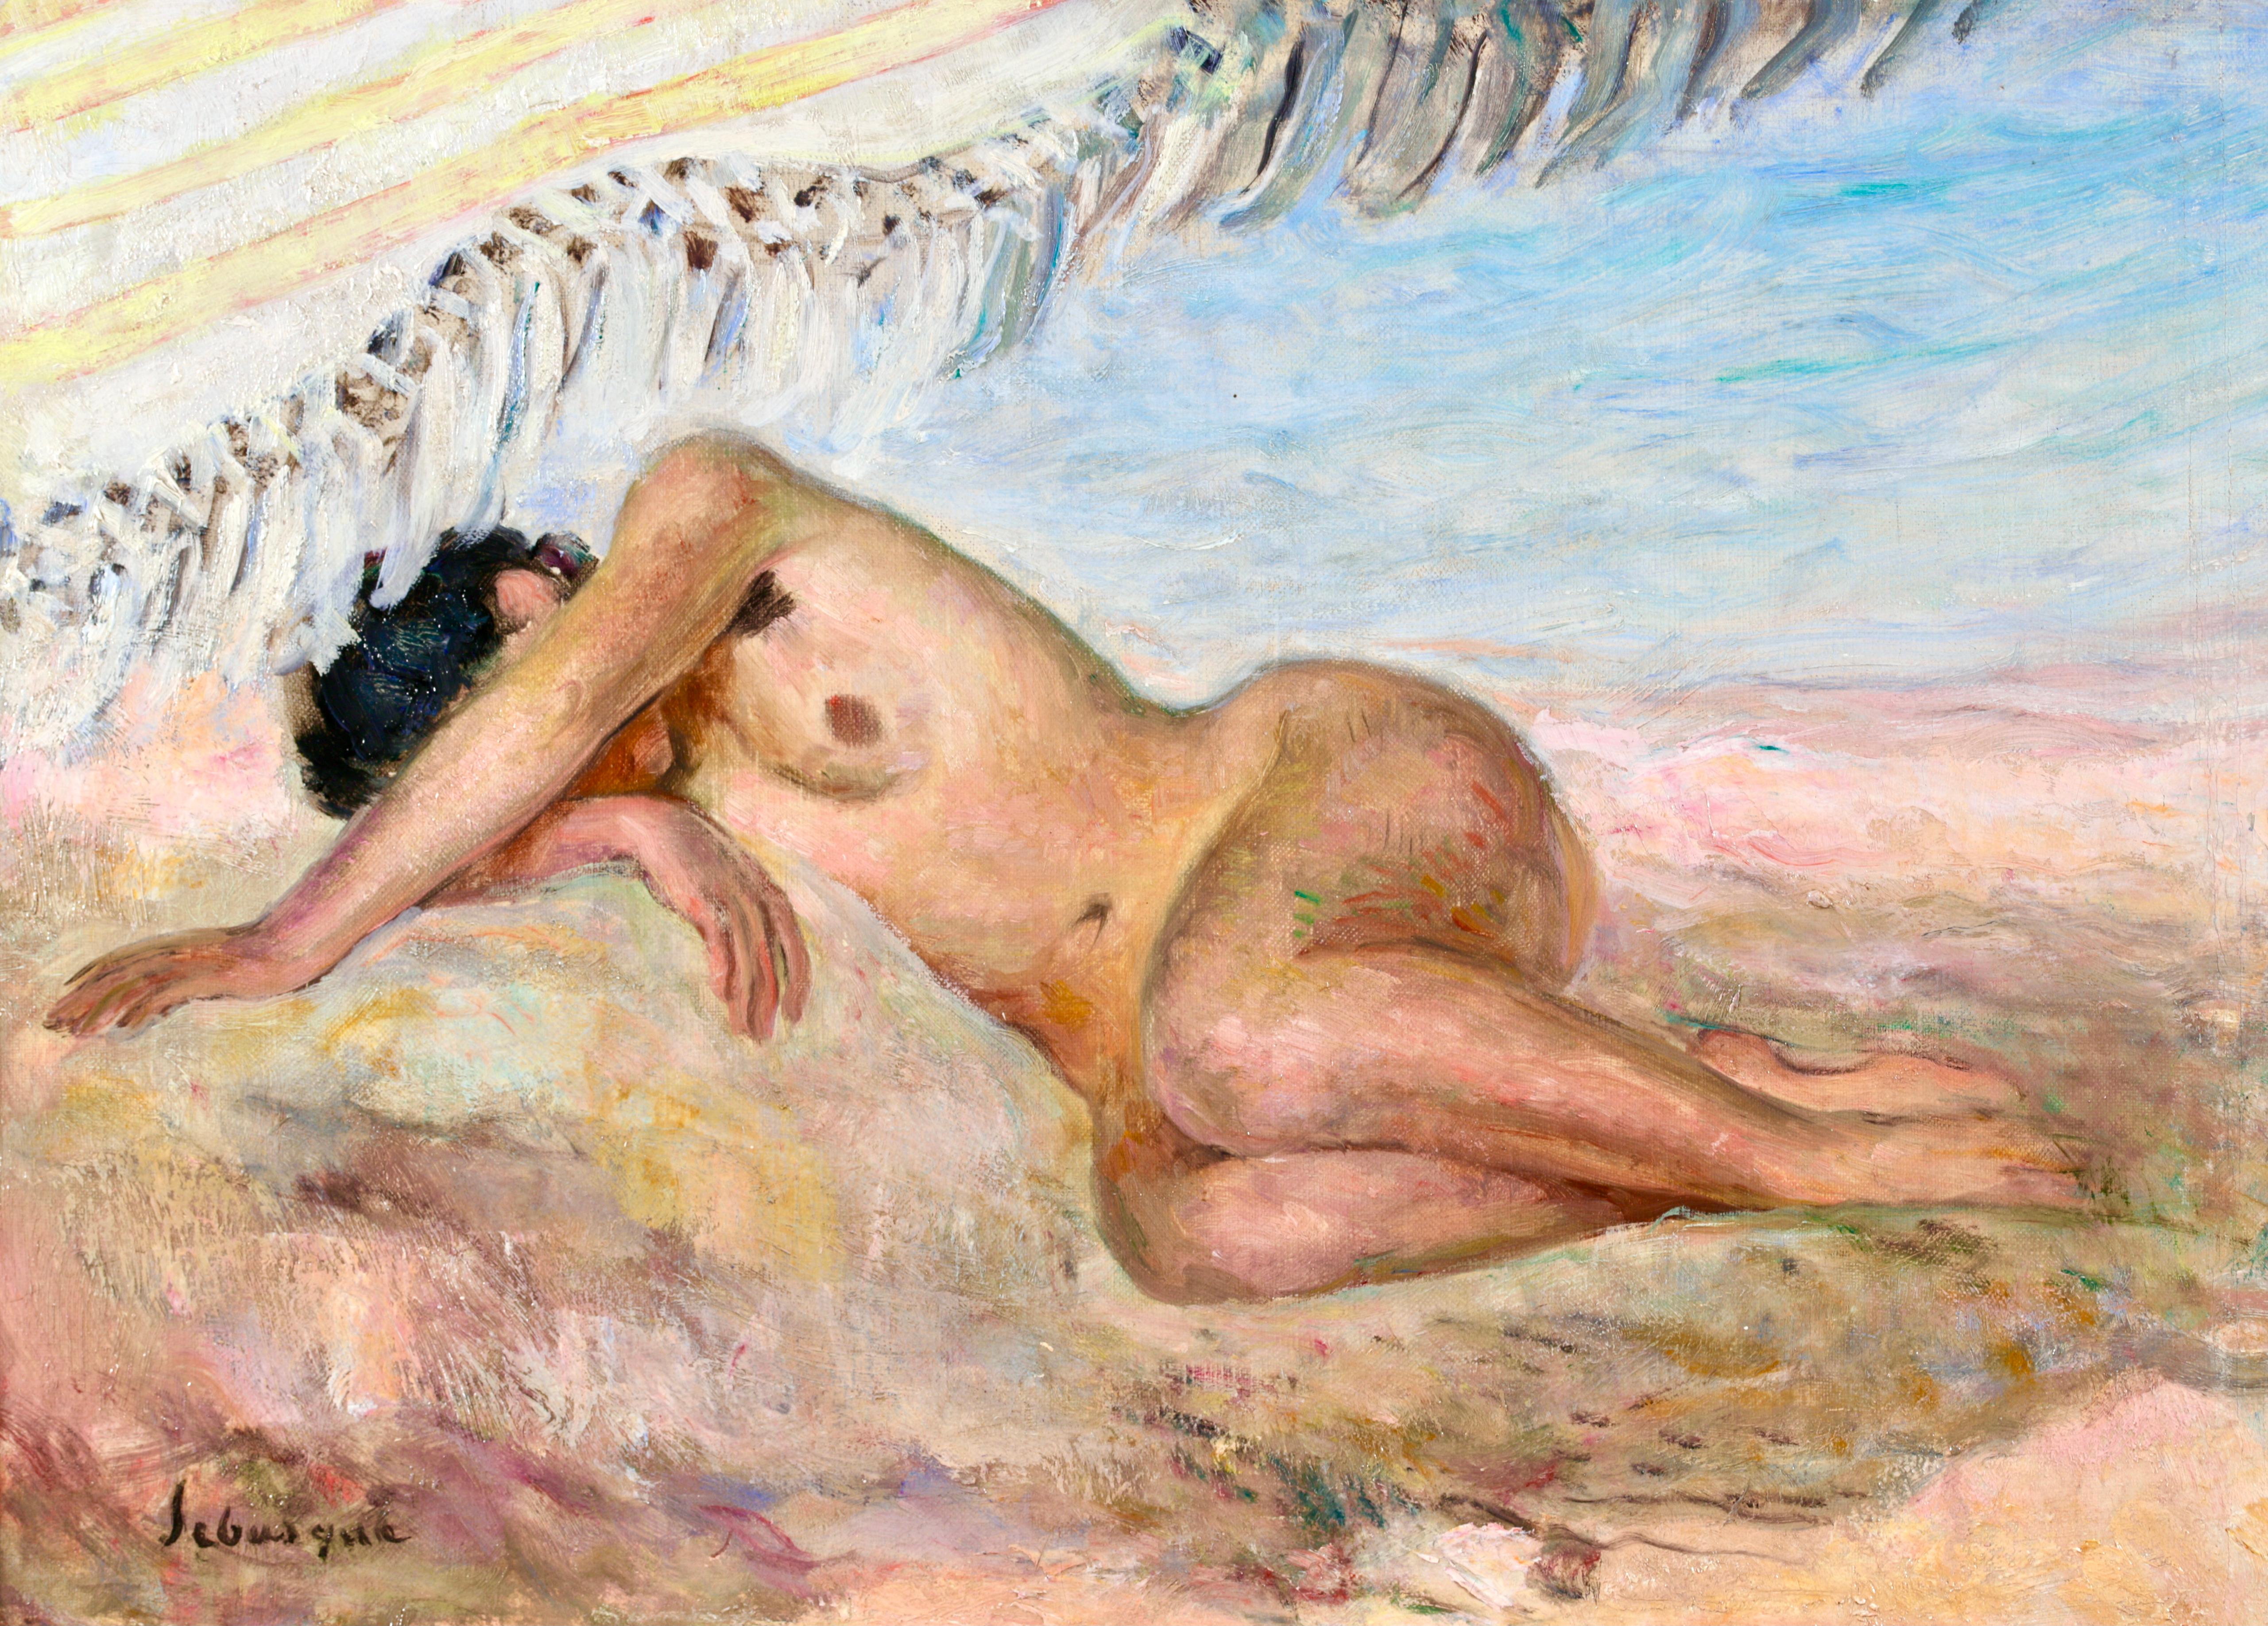 Signed oil on canvas circa 1920 by French post impressionist painter Henri Lebasque. The work depicts a nude brunette woman lying on a beach, her arm draped over her head covering her face. A beautifully brushed piece.

Signature:
Signed lower